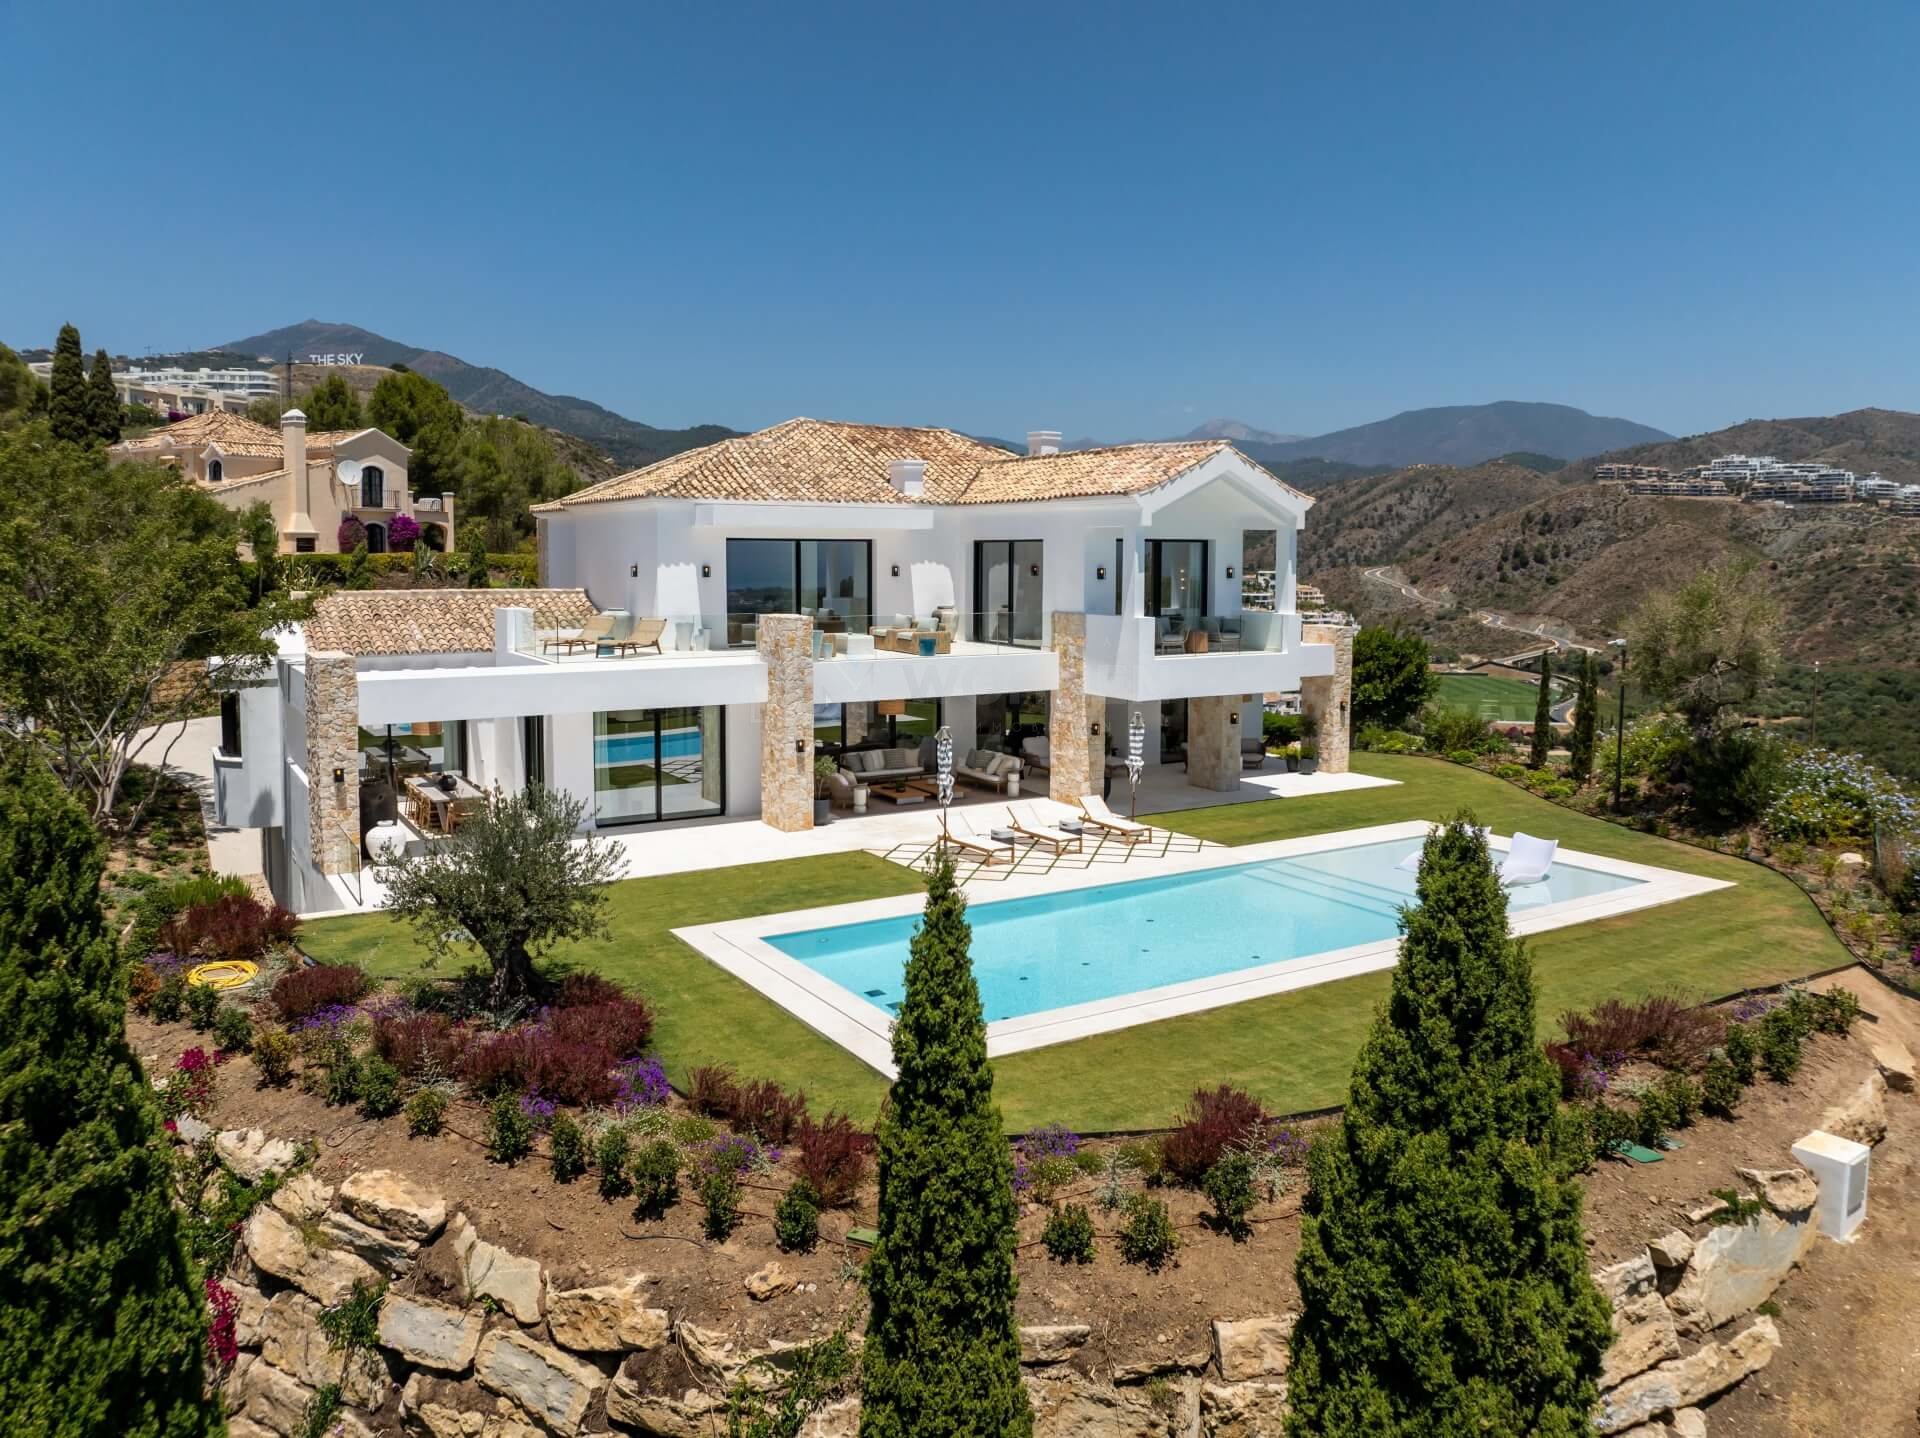 Stunning new-build villa with panoramic views of the surrounding area and Mediterranean sea